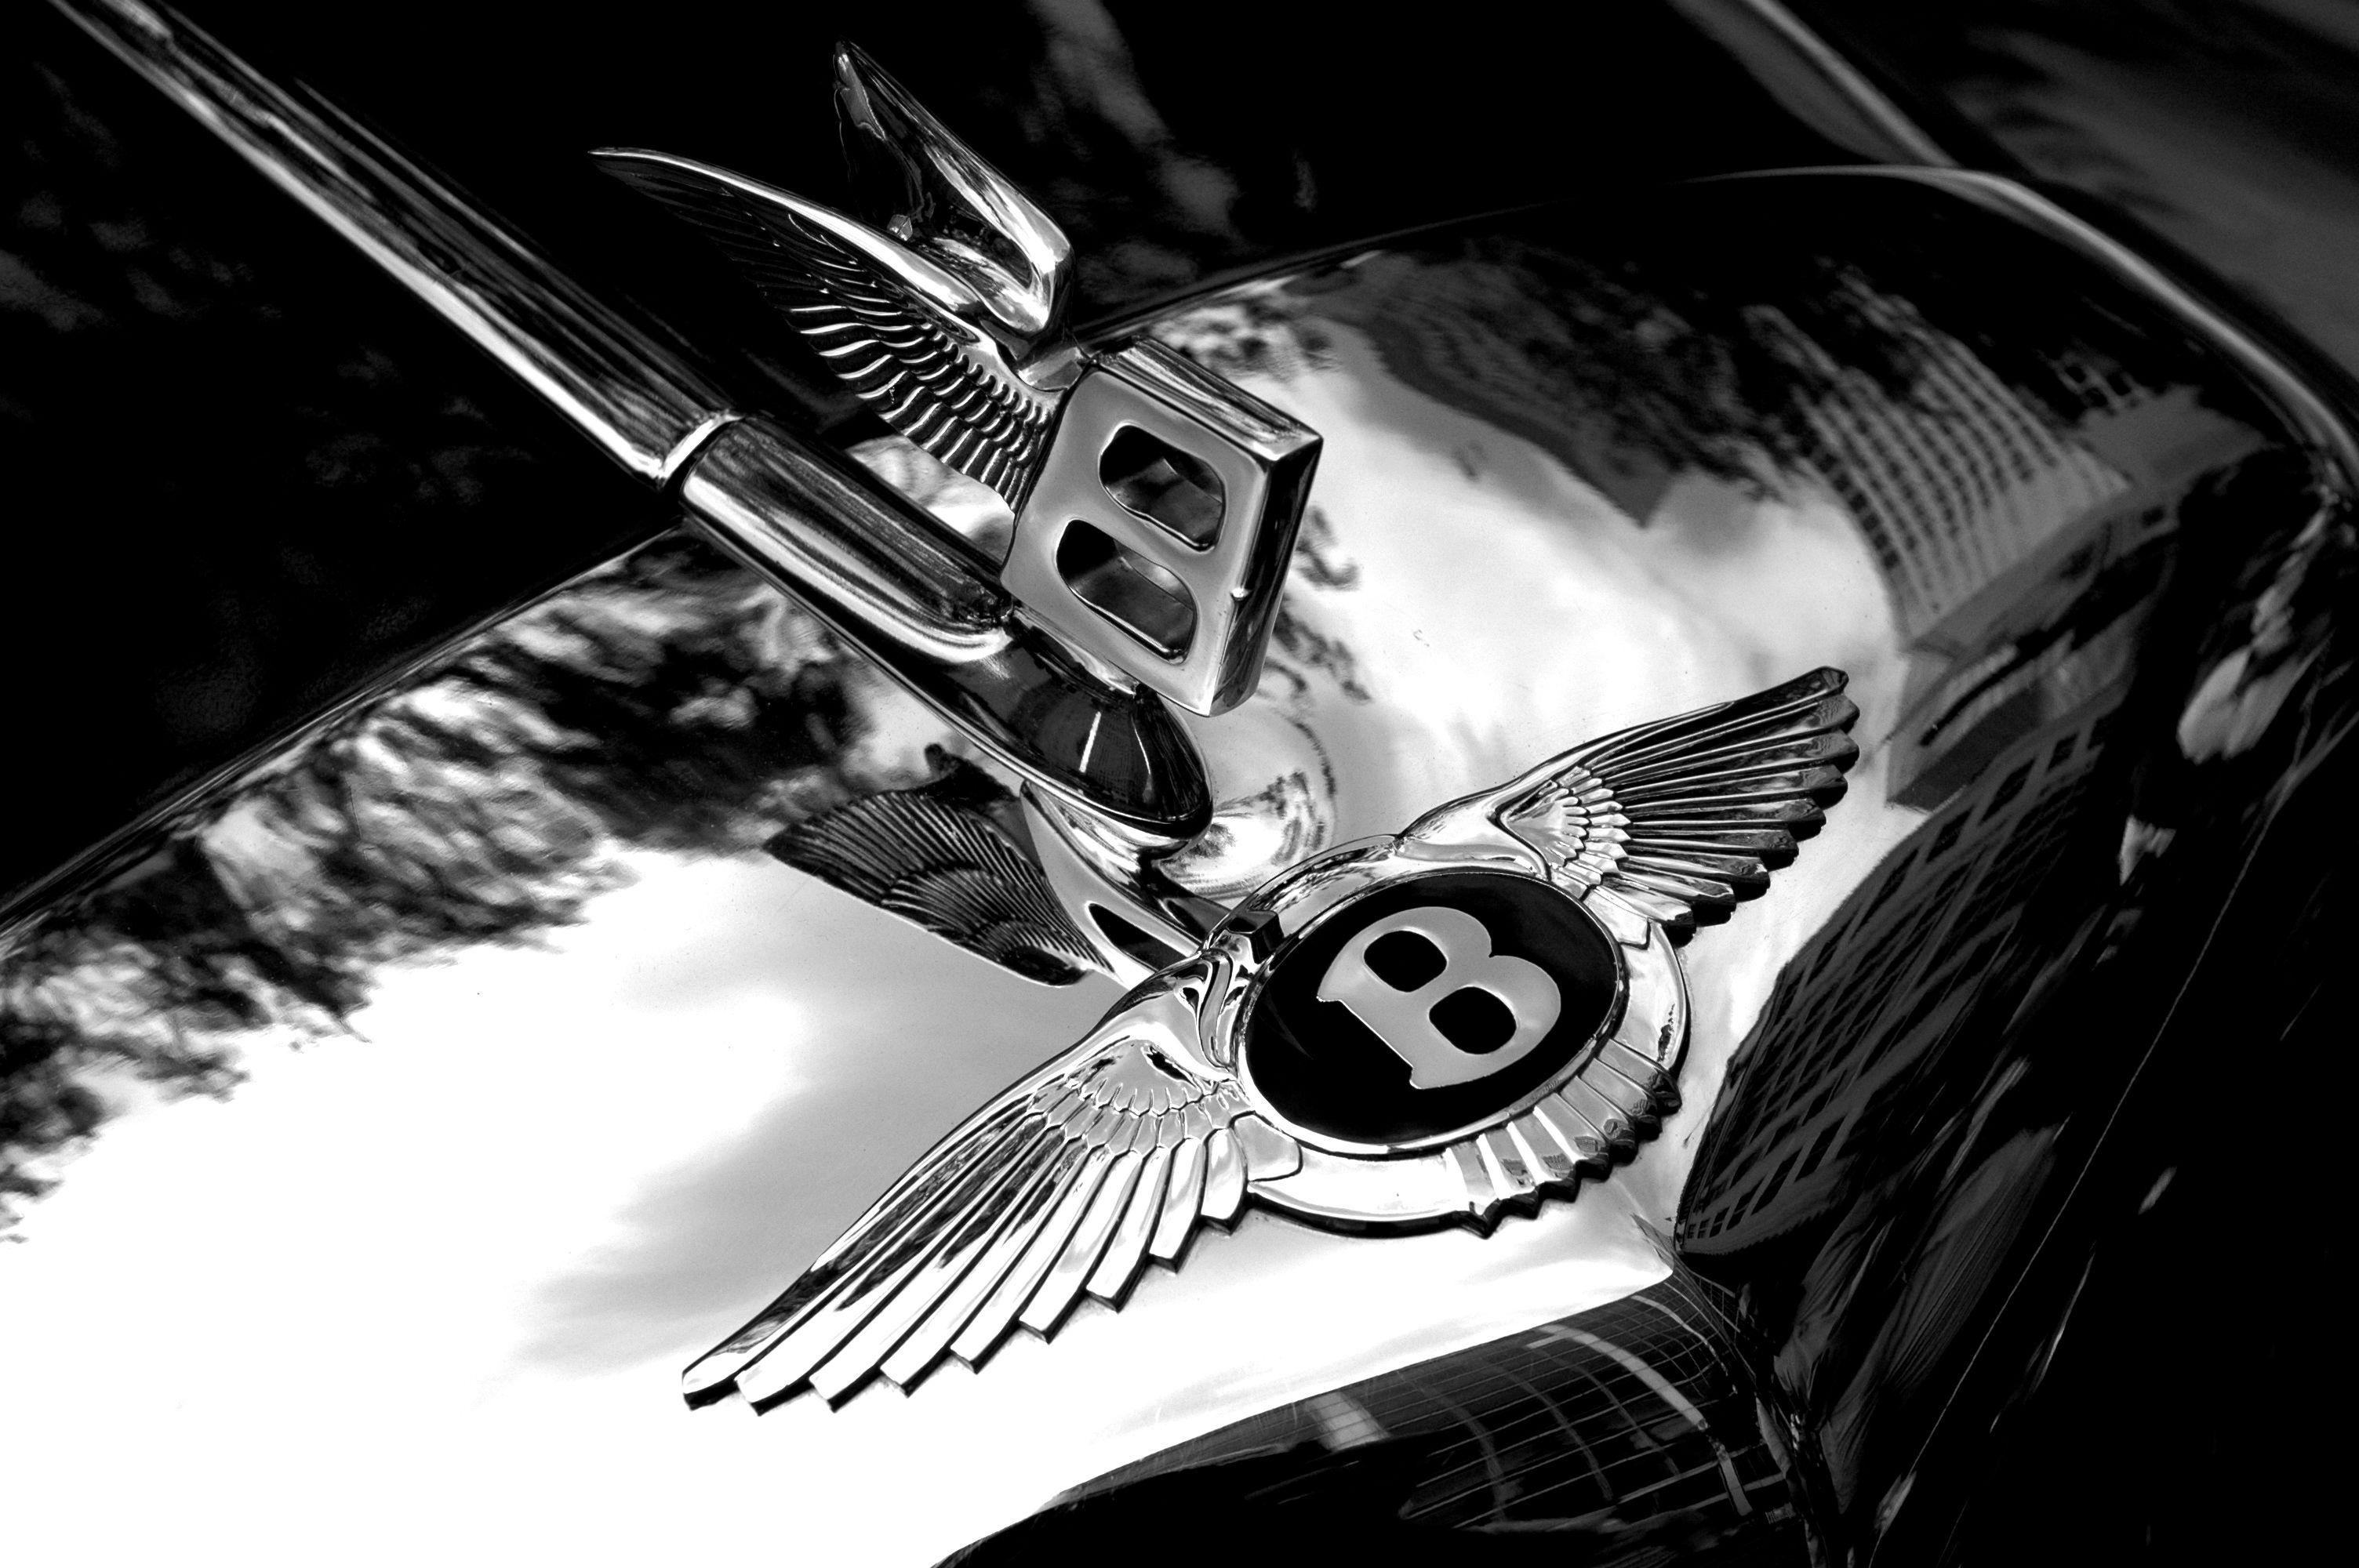 Bentley Wallpaper for PC. Full HD Picture